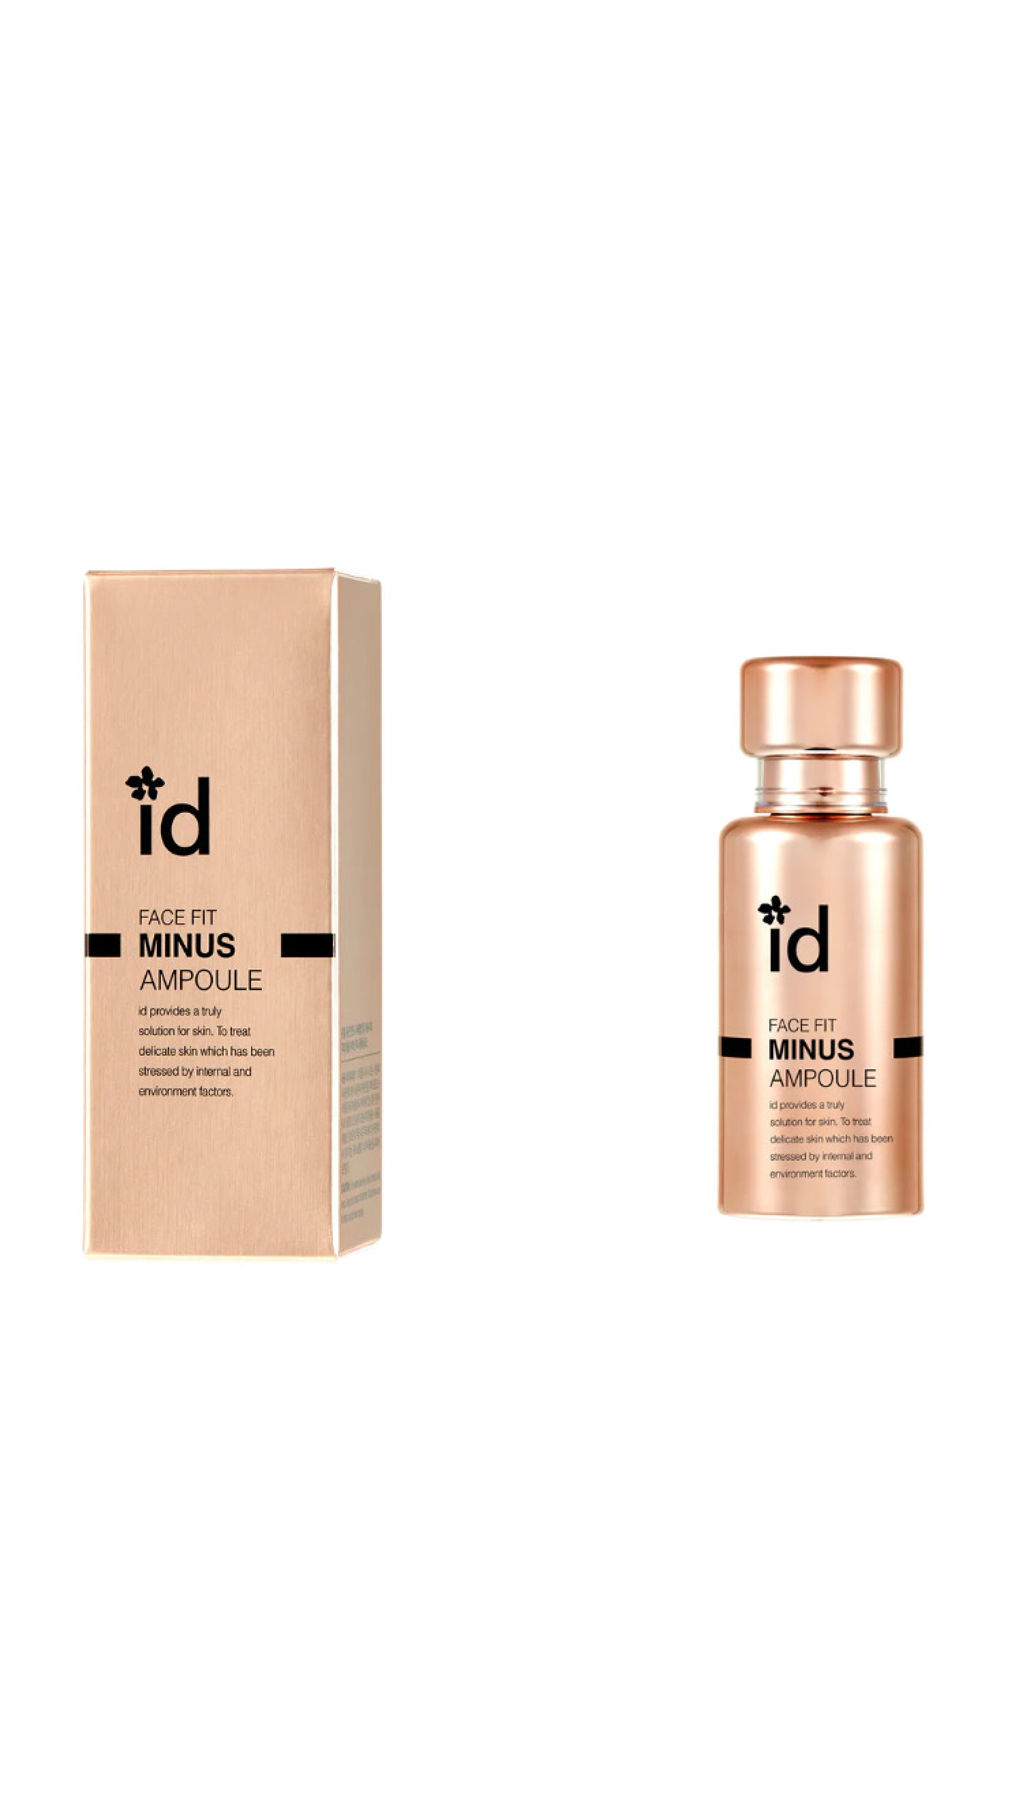 ID PLACOSMETICS Face fit minus Ampoule - ea857-52937D37-A0AD-4366-AED9-9332F679A095.jpeg